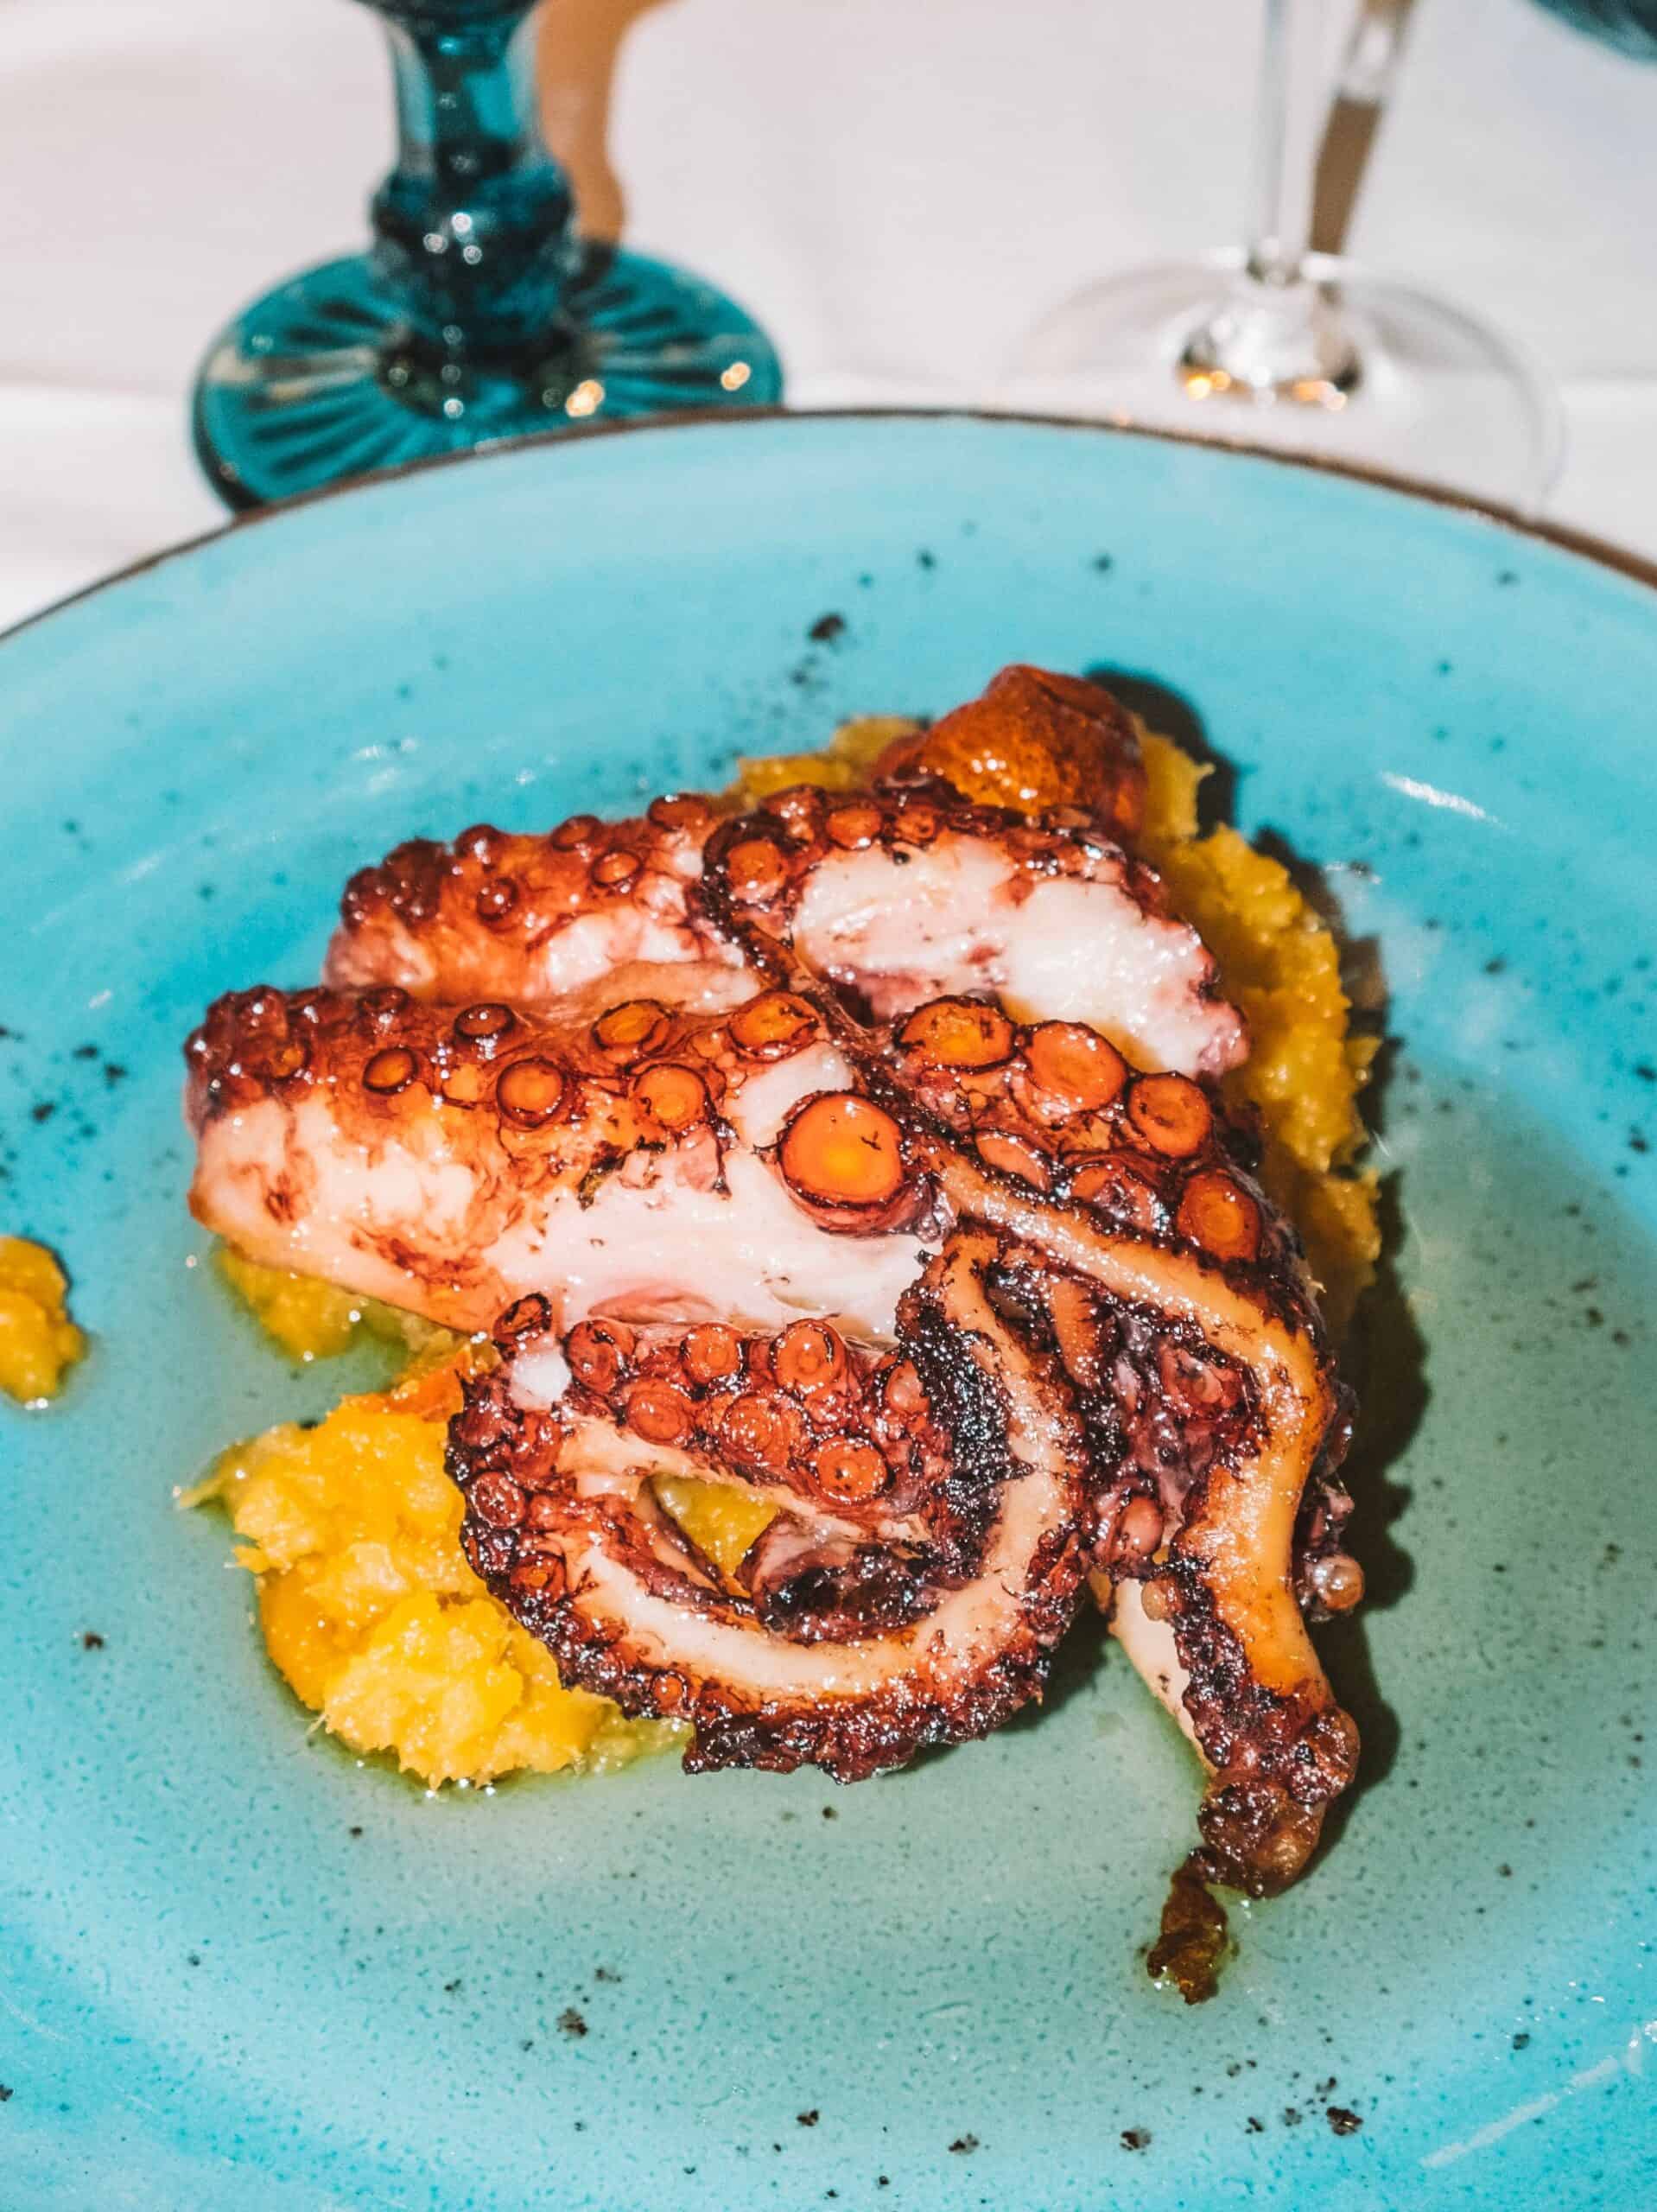 A heaping plate of grilled octopus on a bed of sweet potatoes from Farol de Santa Luzia restaurant. 